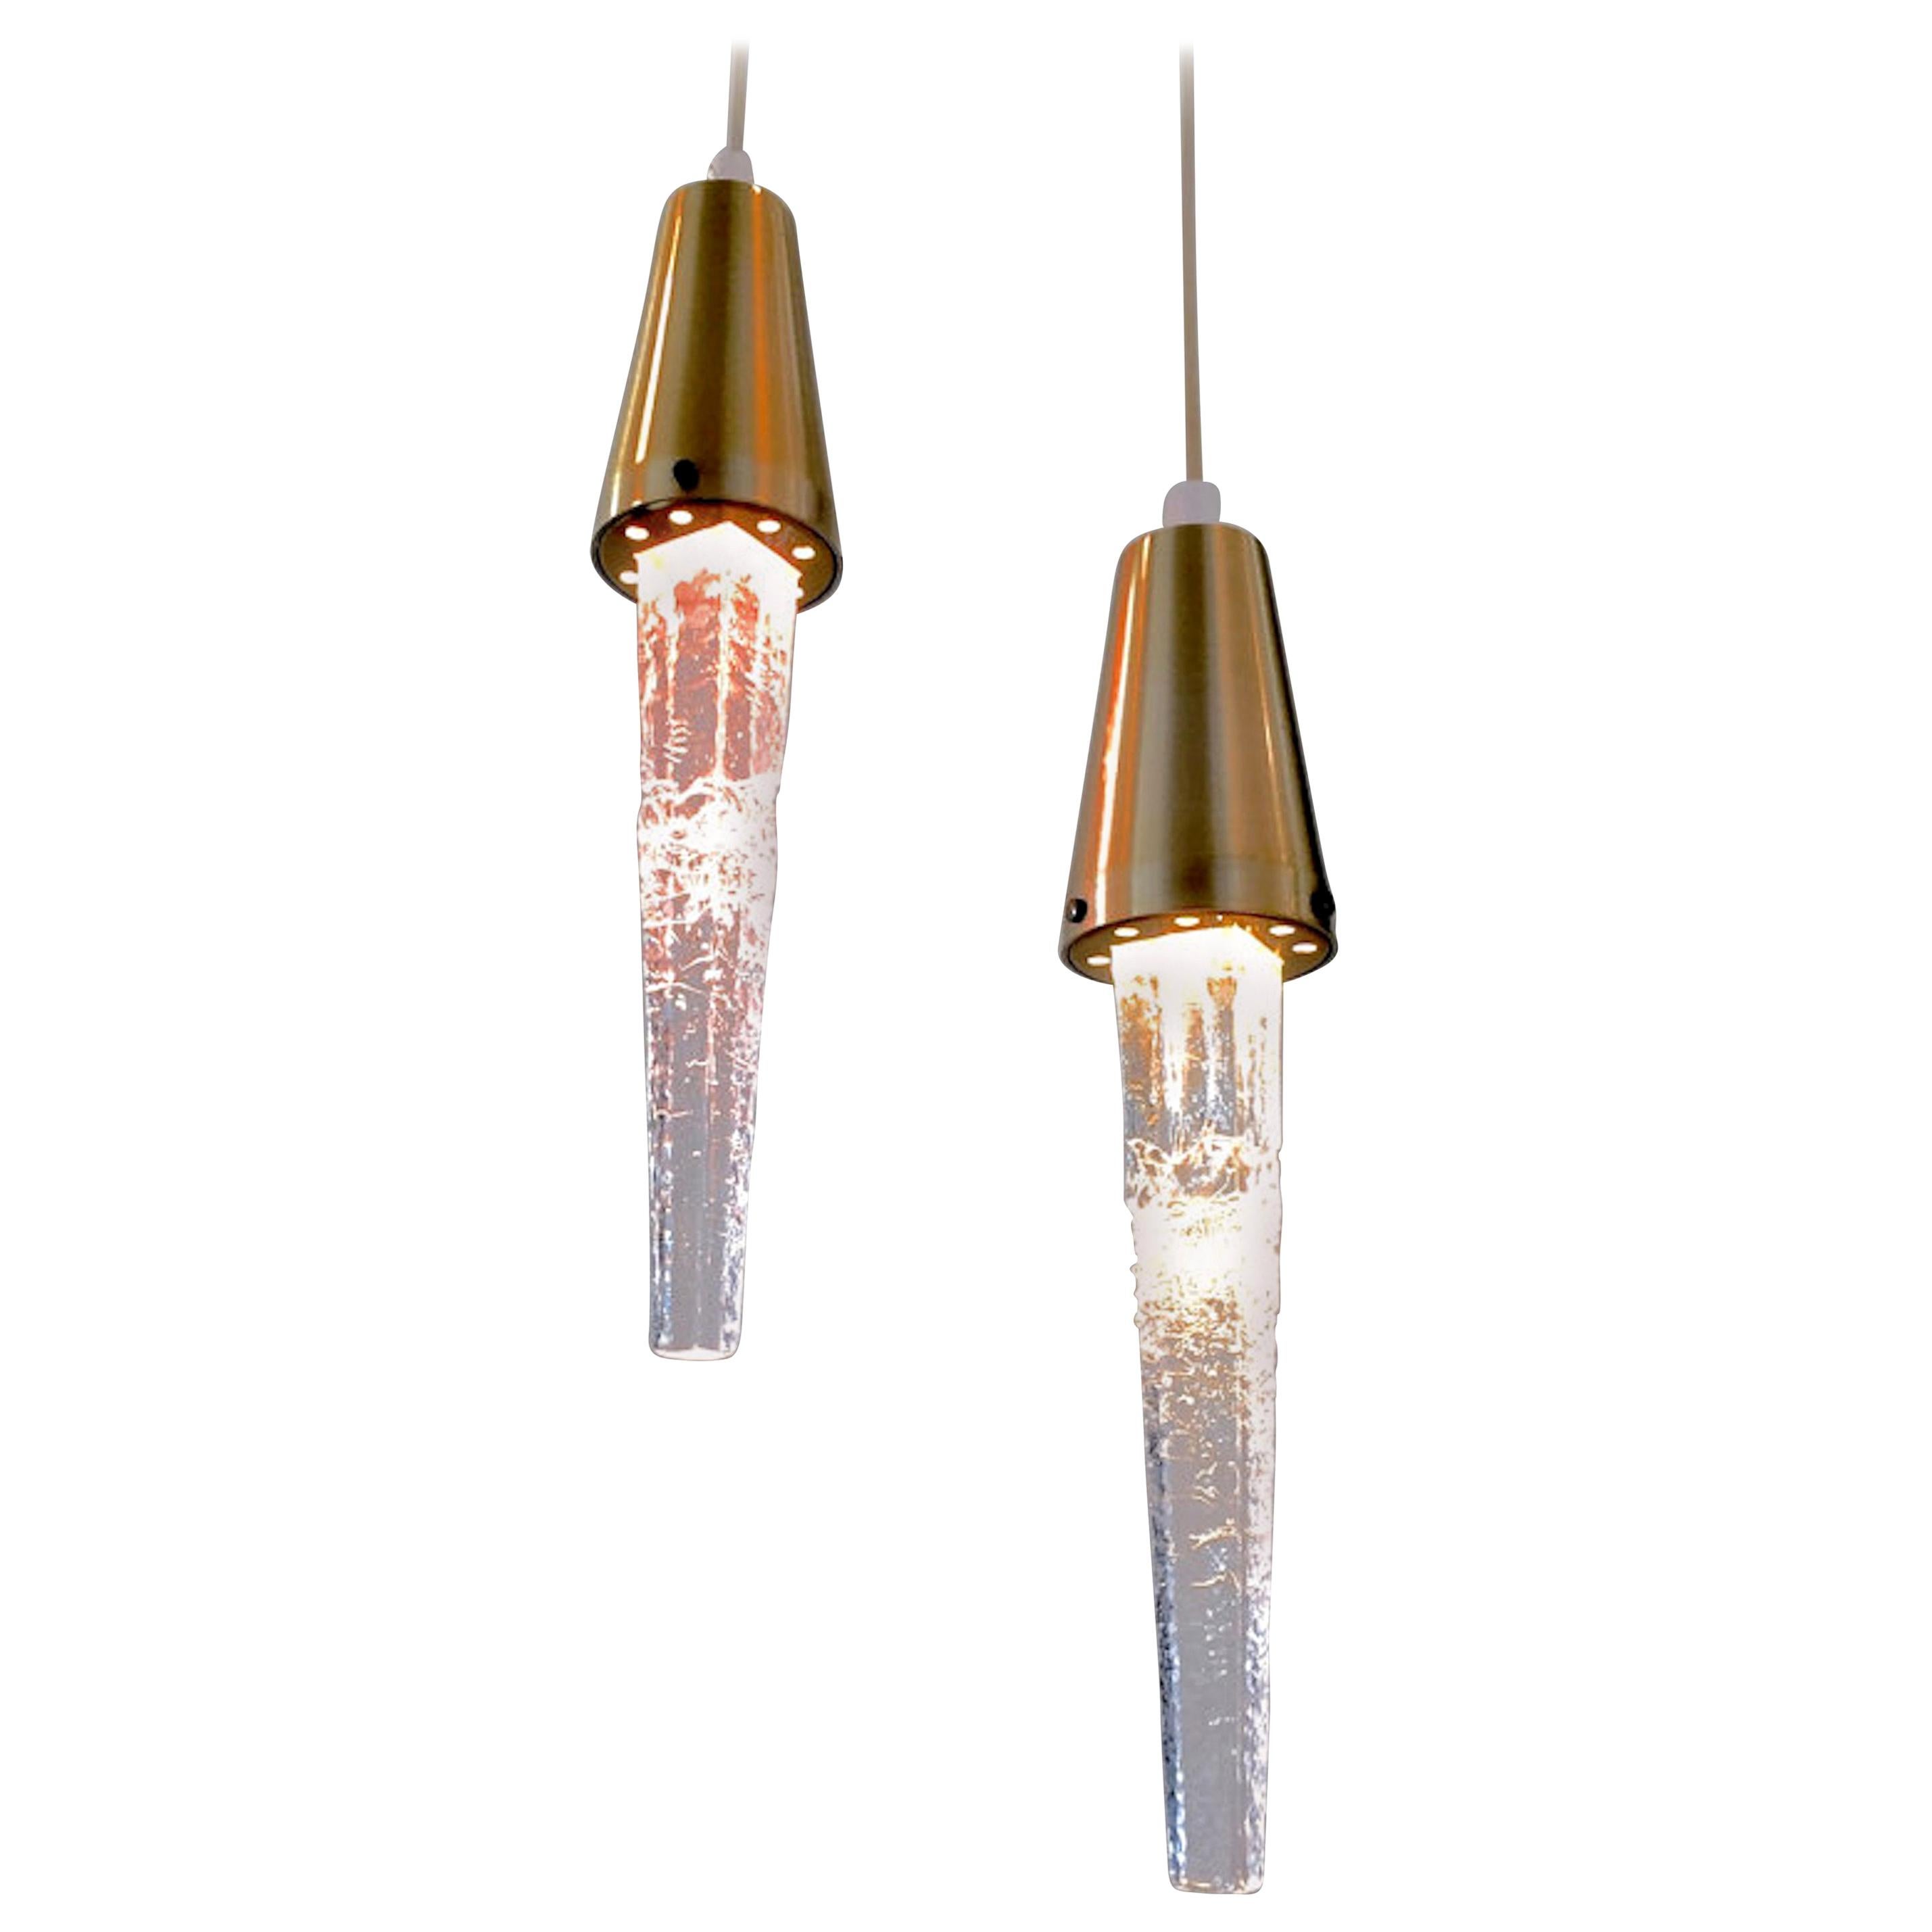 Vintage Scandinavian Crystal Icicle Pendant Lamps from Ateljé Engberg For Sale